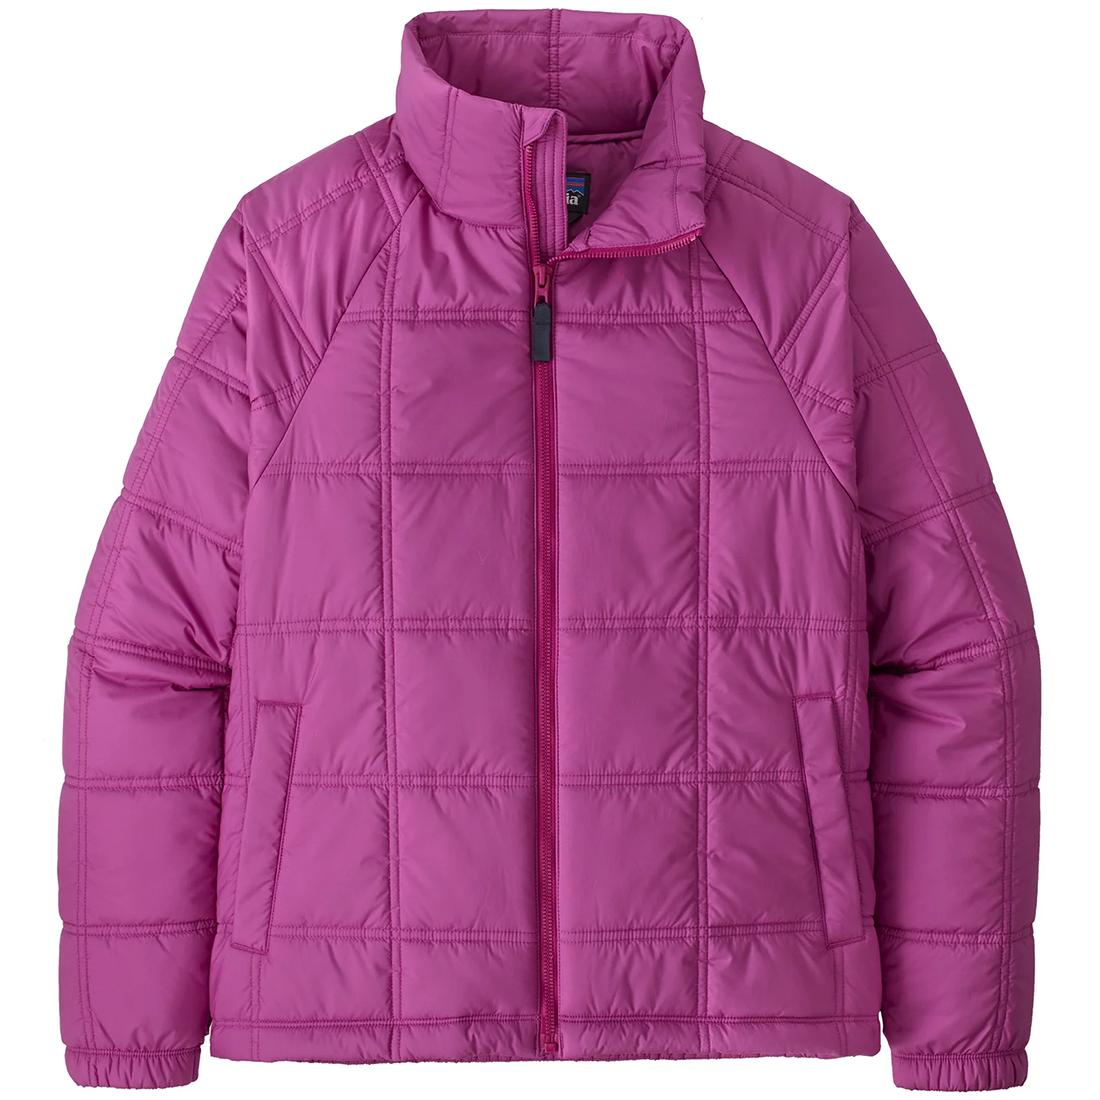  Women's Lost Canyon Jacket